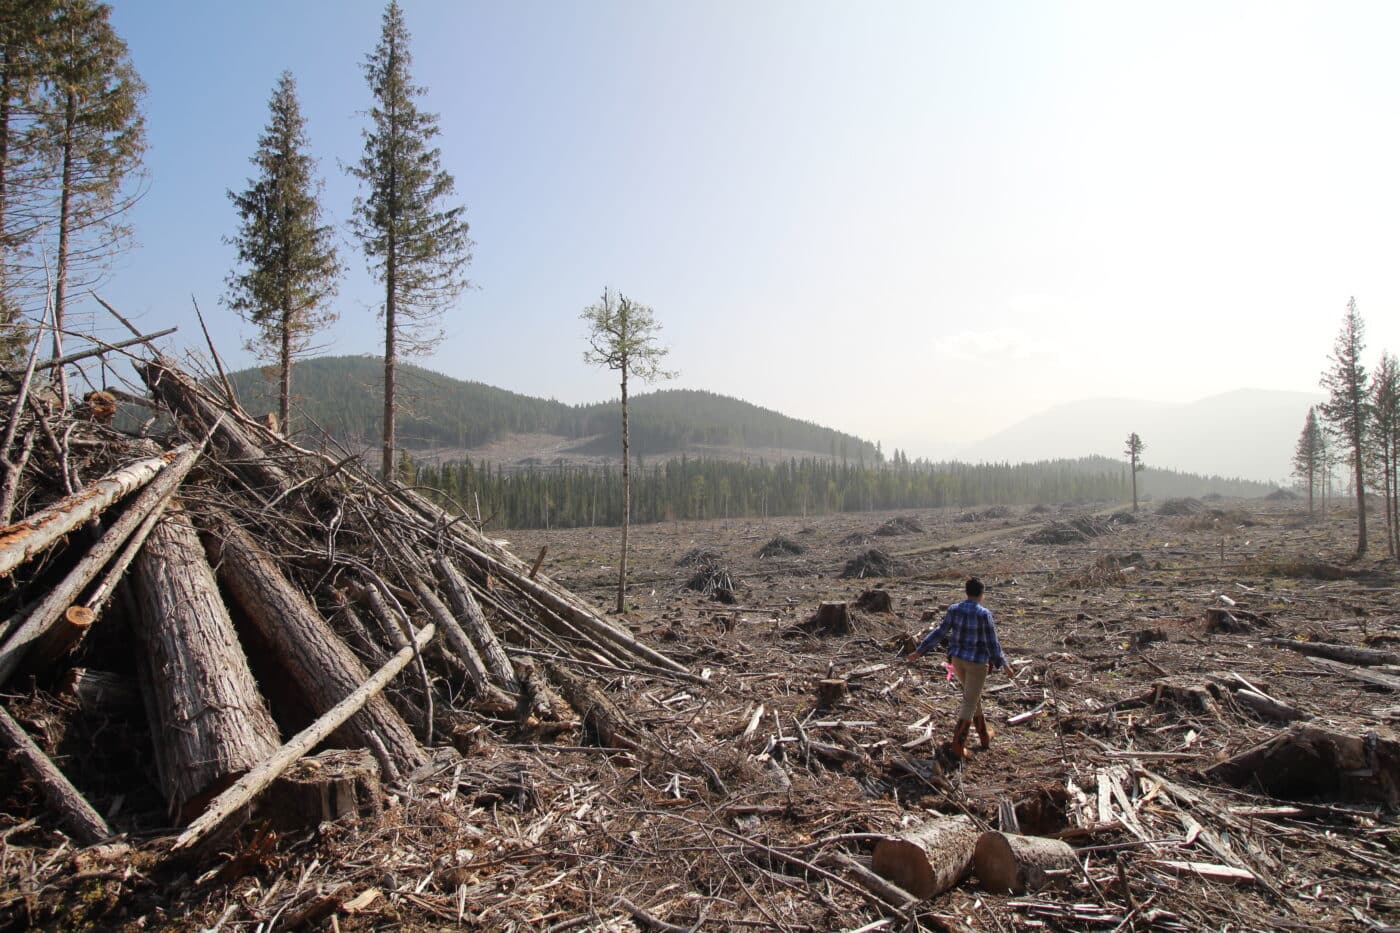 B.C. gives Pacific BioEnergy green light to log rare inland rainforest for wood pellets